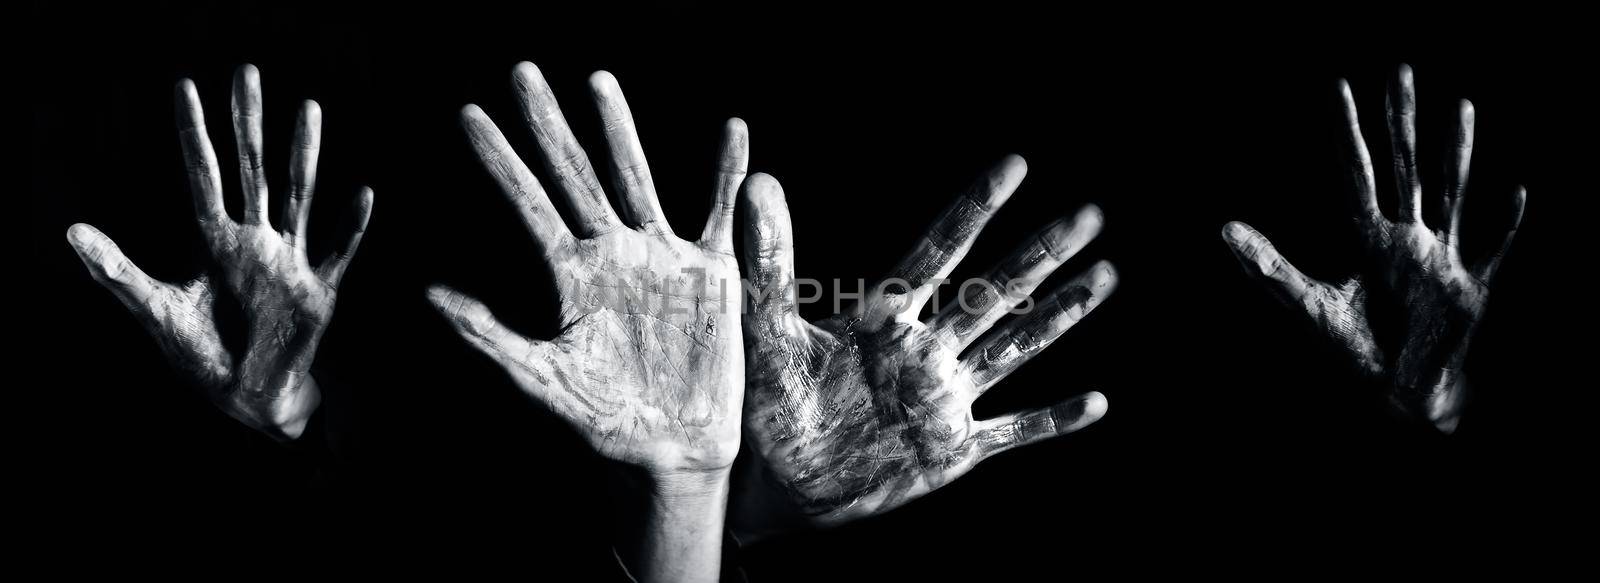 Close up shot of hands of children with some paint over it isolated over a black background, horizontal shot.